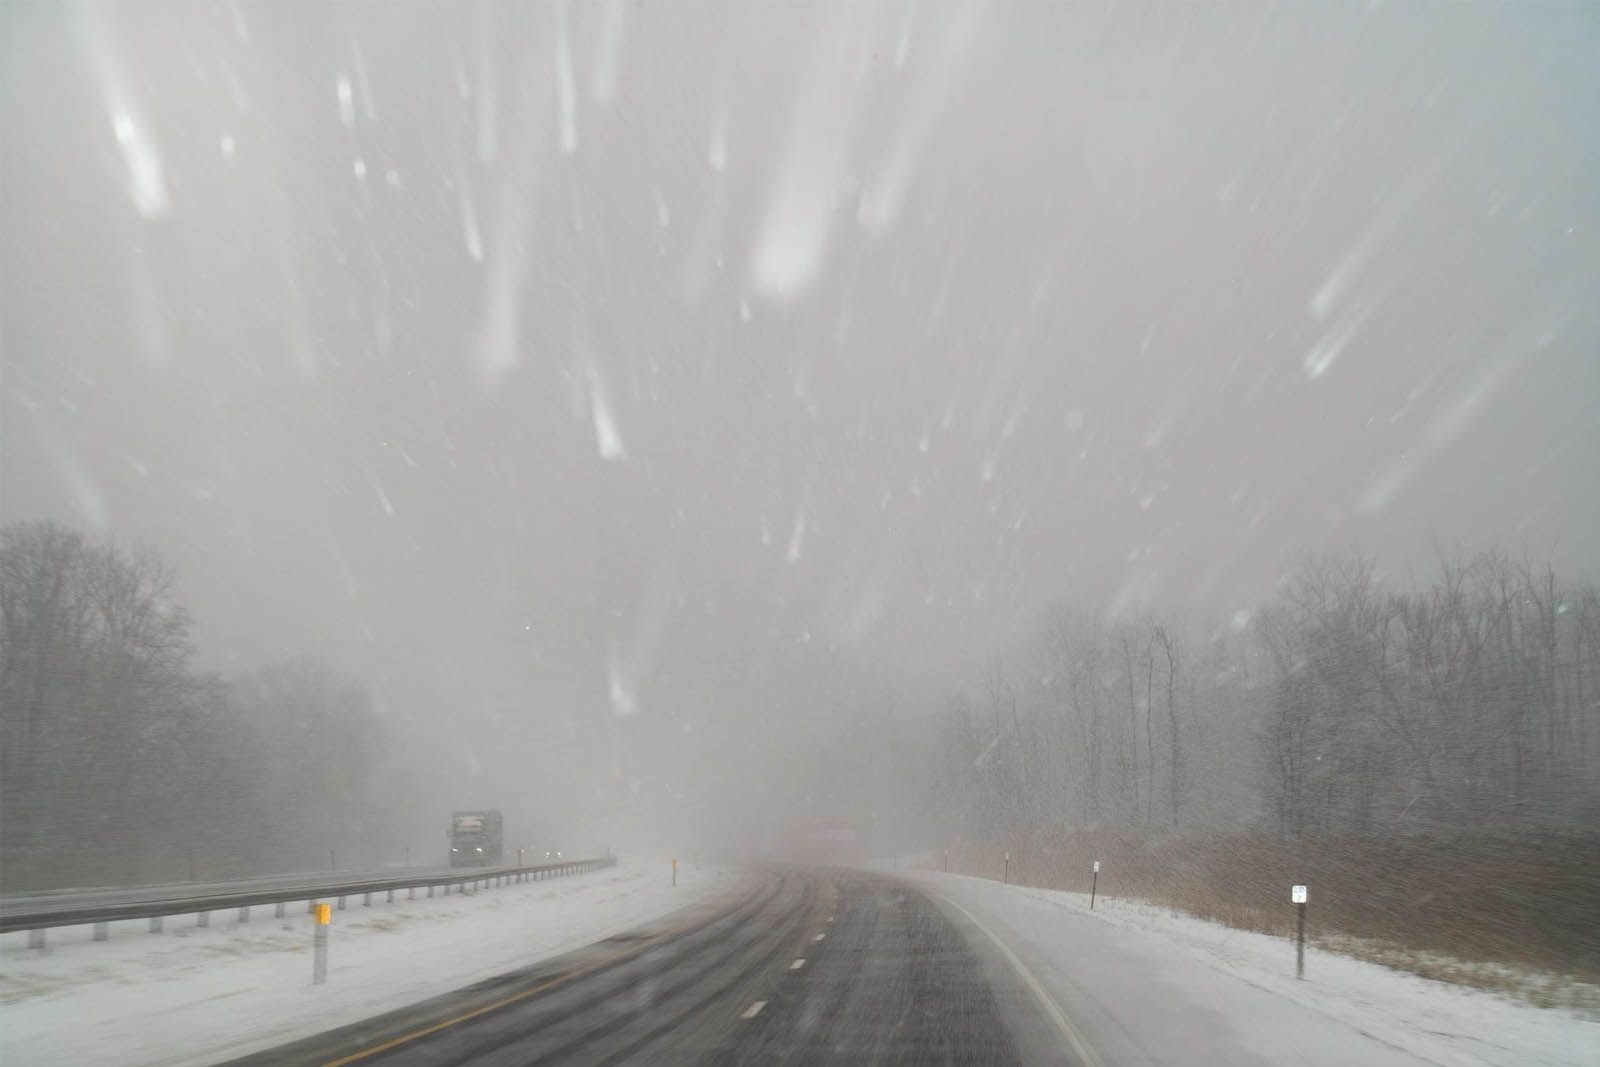 A snowy, gray day on the highway from the viewpoint of a driver.